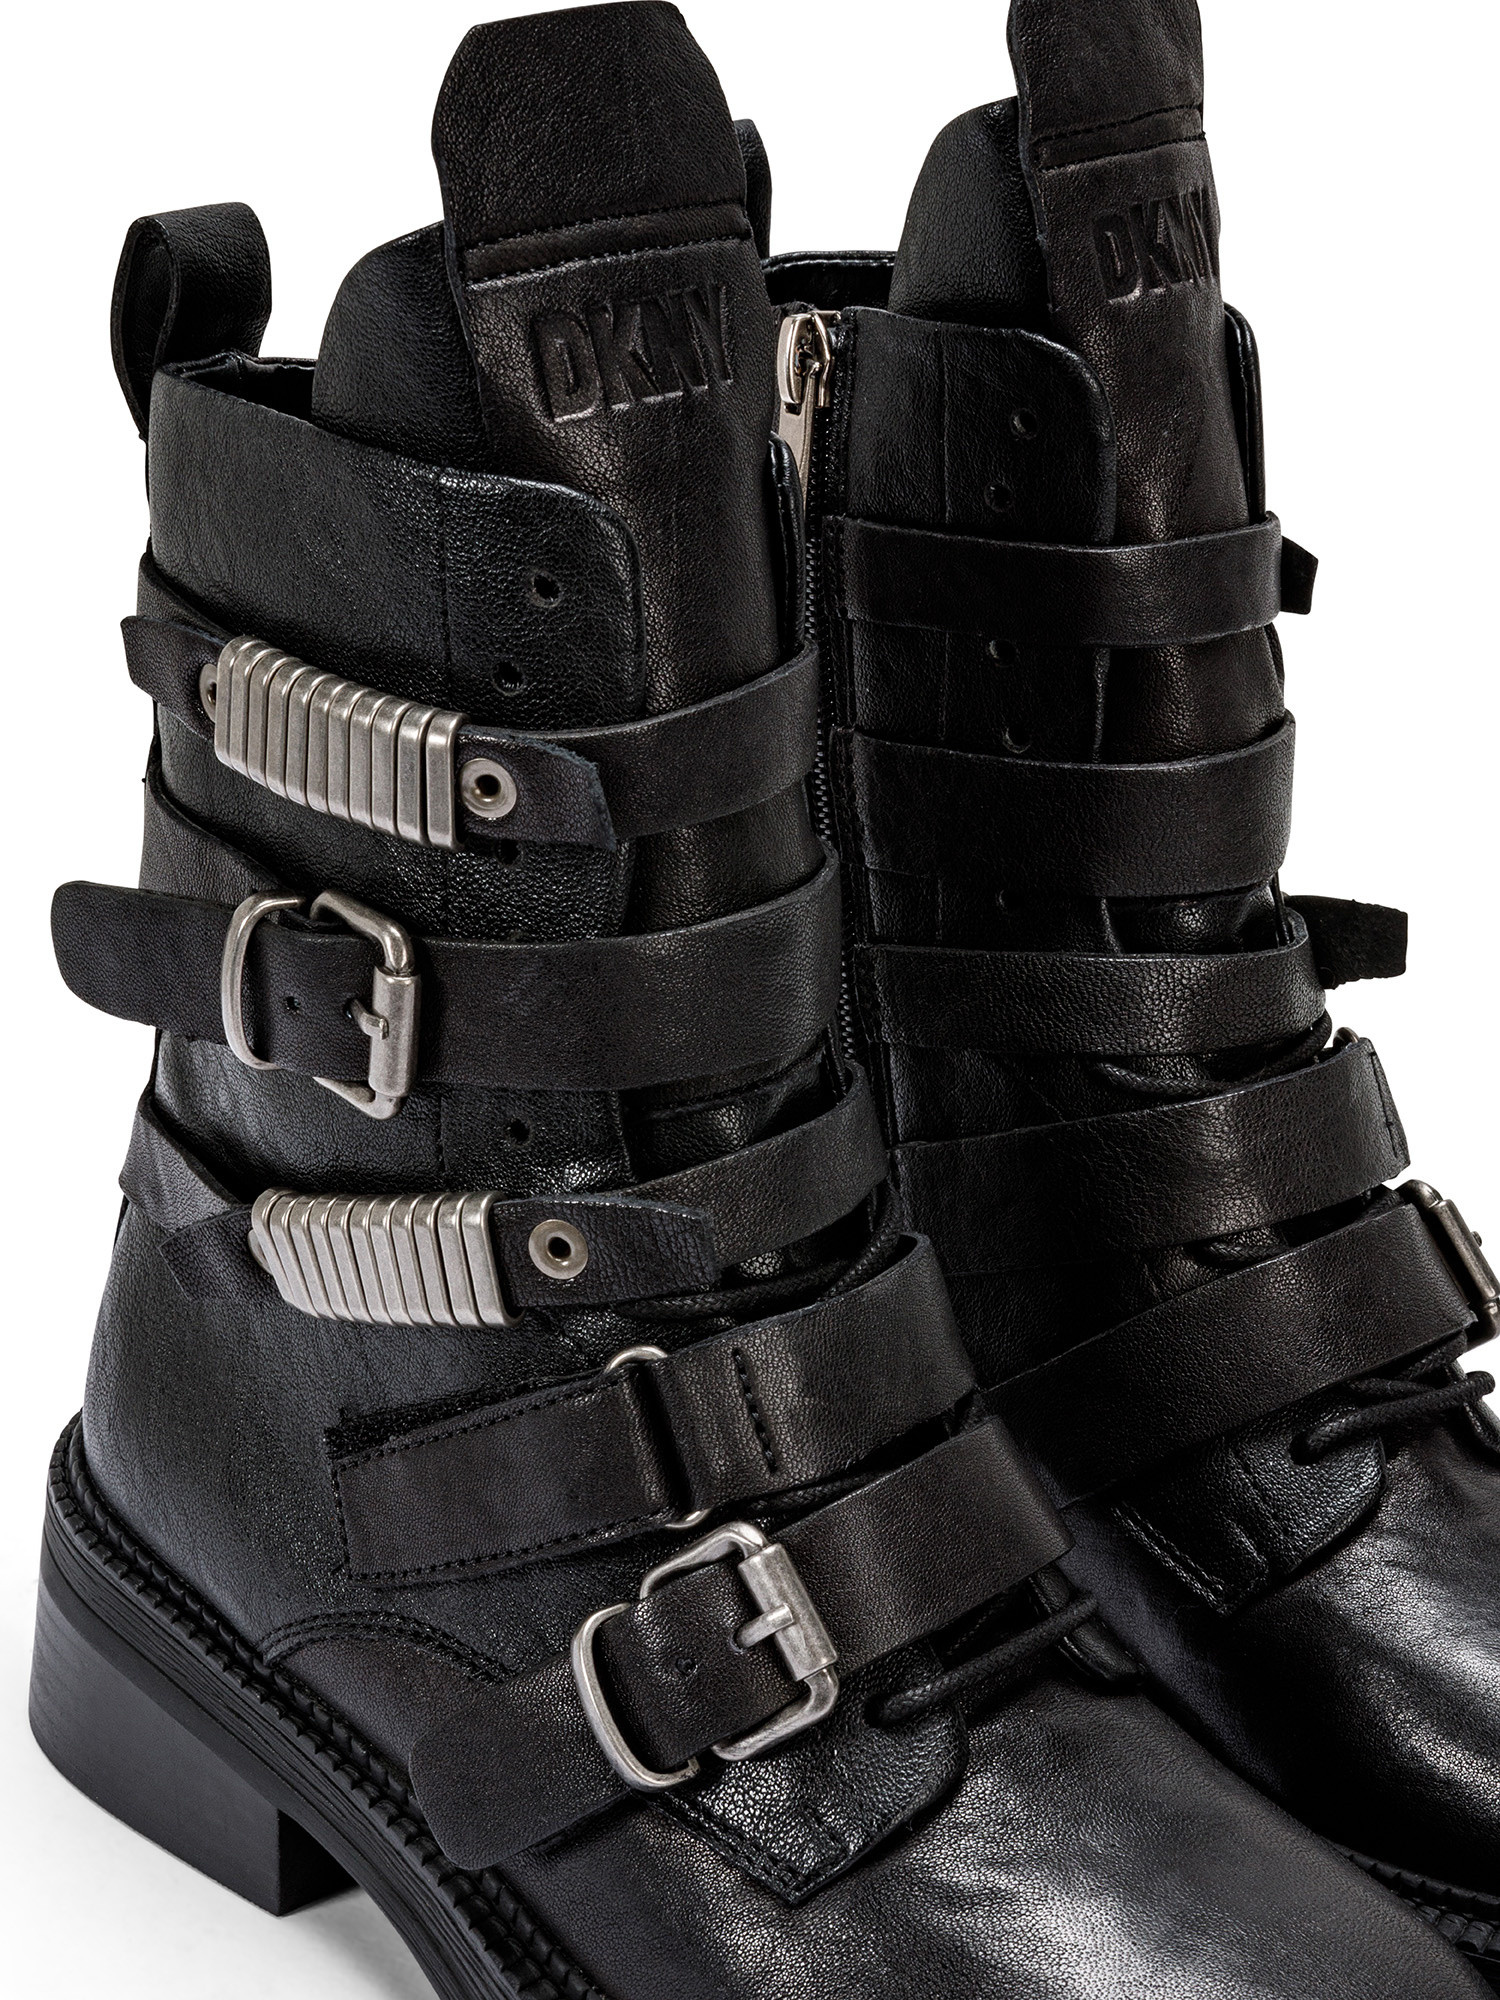 DKNY - Lace up ankle boots, Black, large image number 3